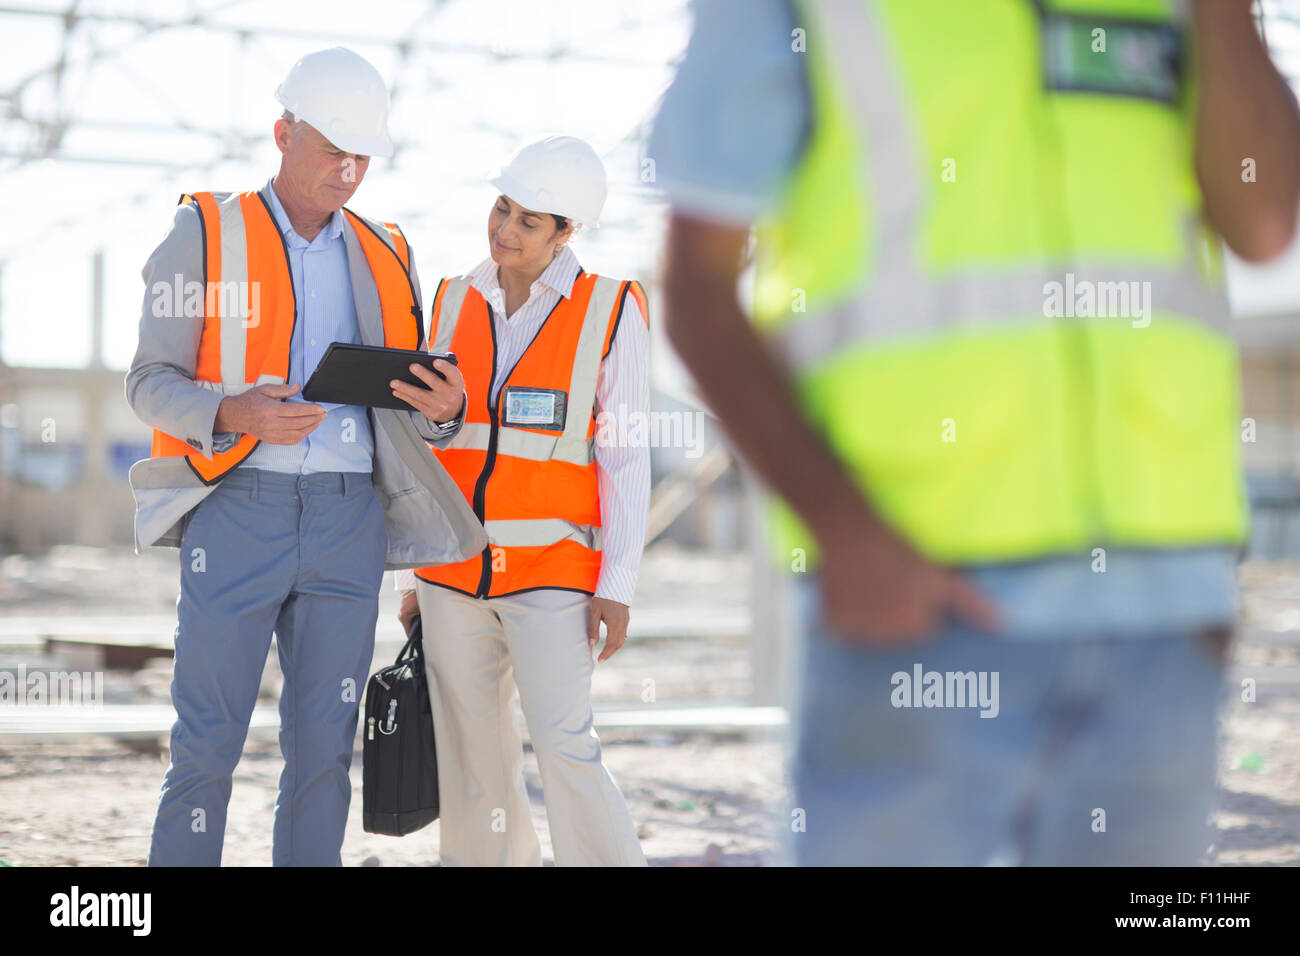 Architects using digital tablet at construction site Stock Photo